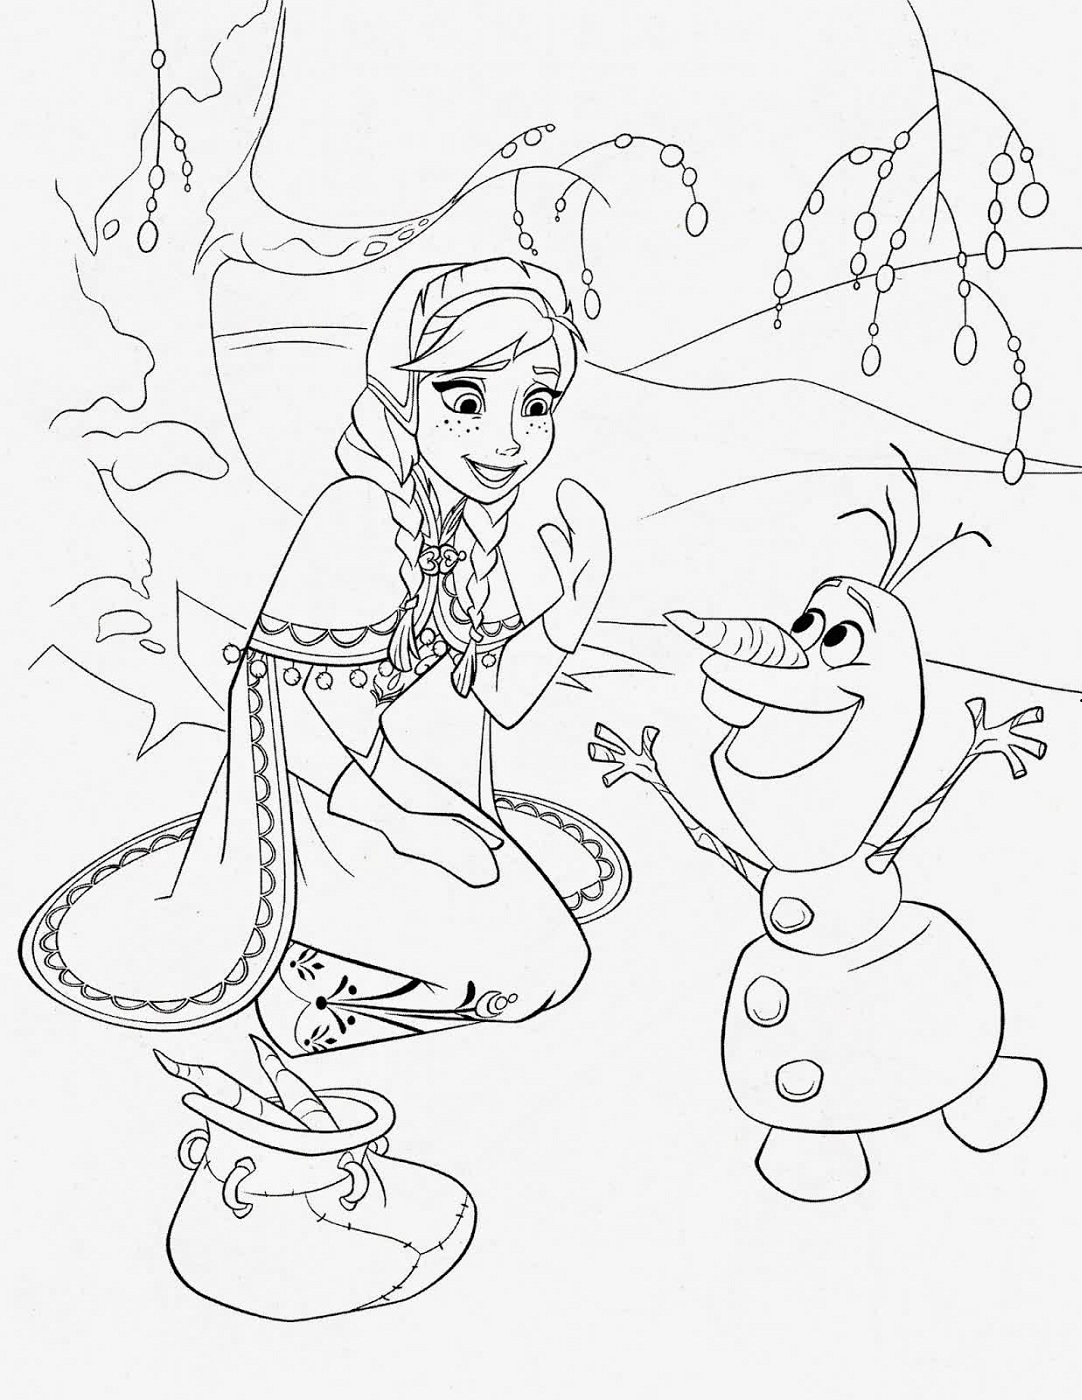 Frozen Worksheets Coloring Printable   Activity Shelter